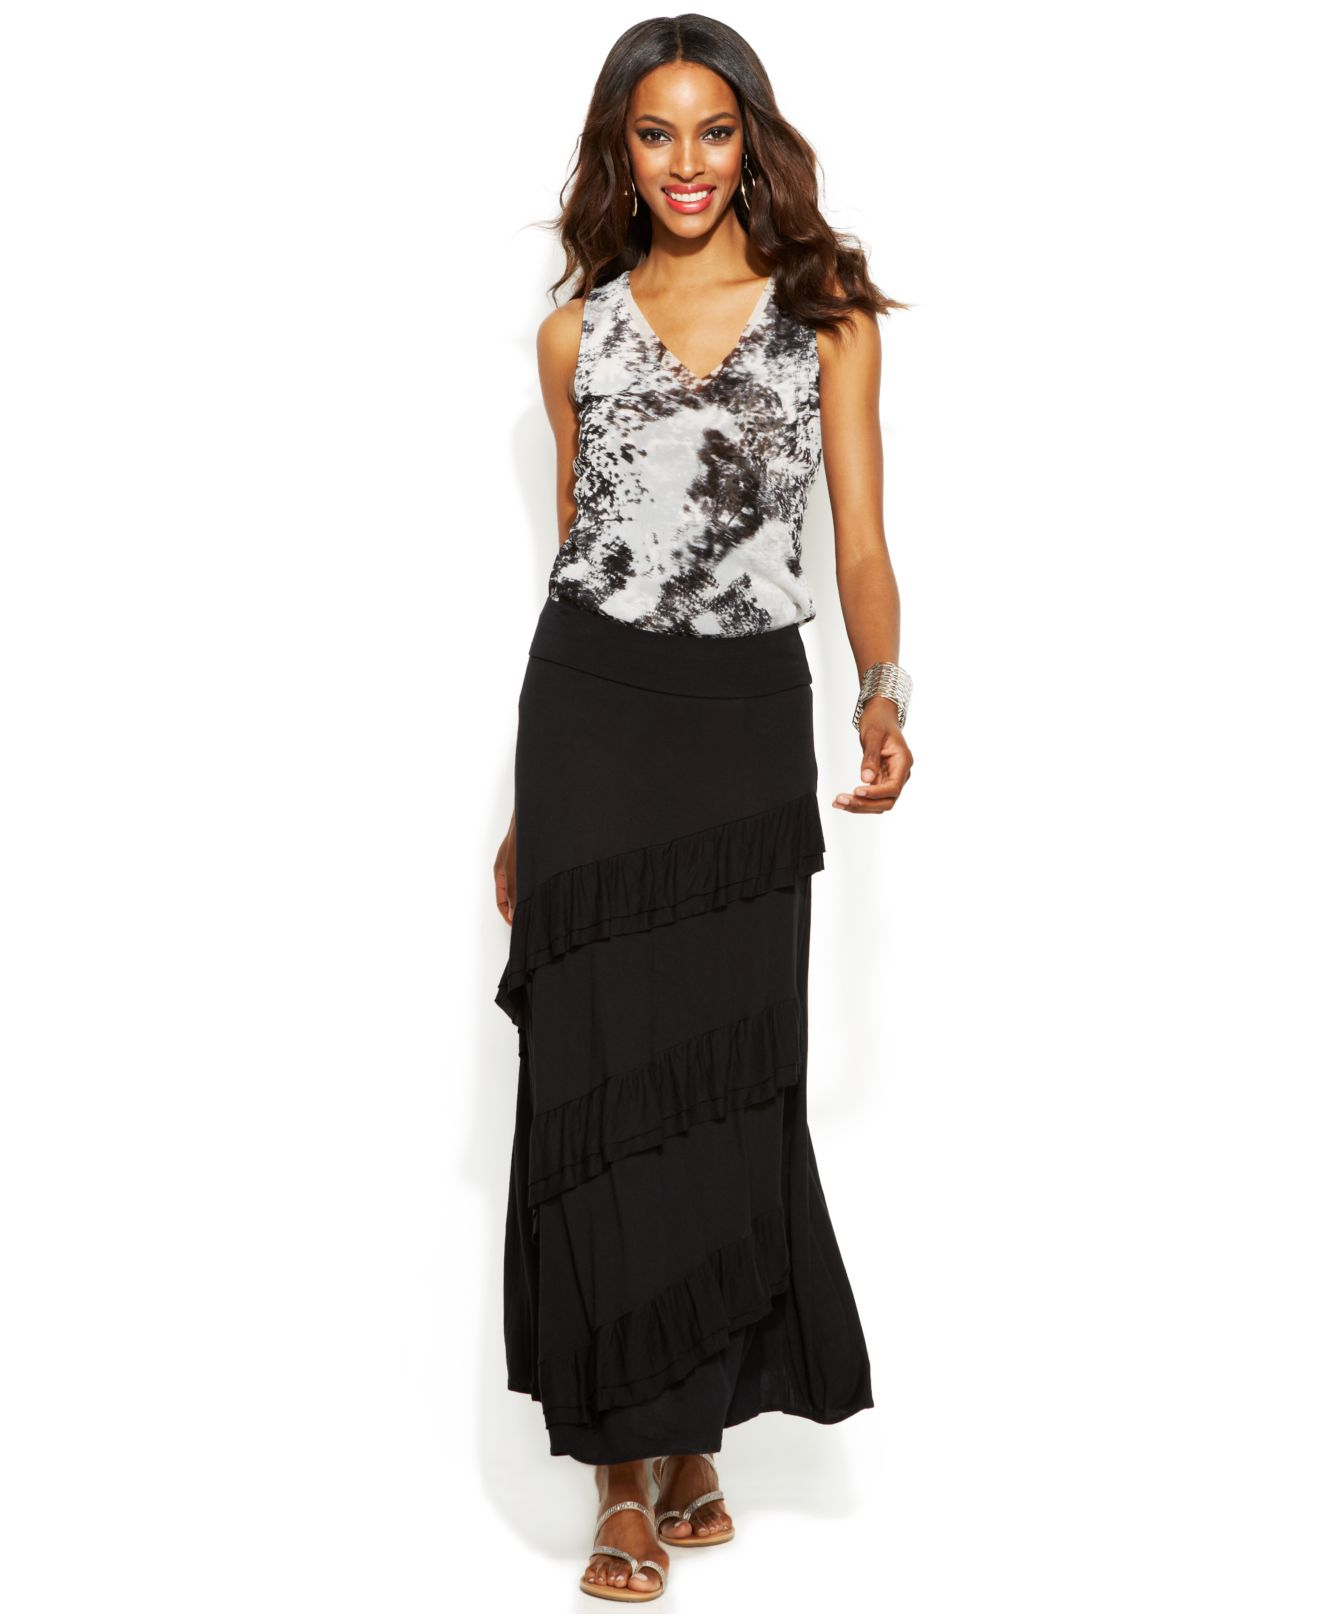 Inc international concepts Petite Tiered Maxi Skirt in